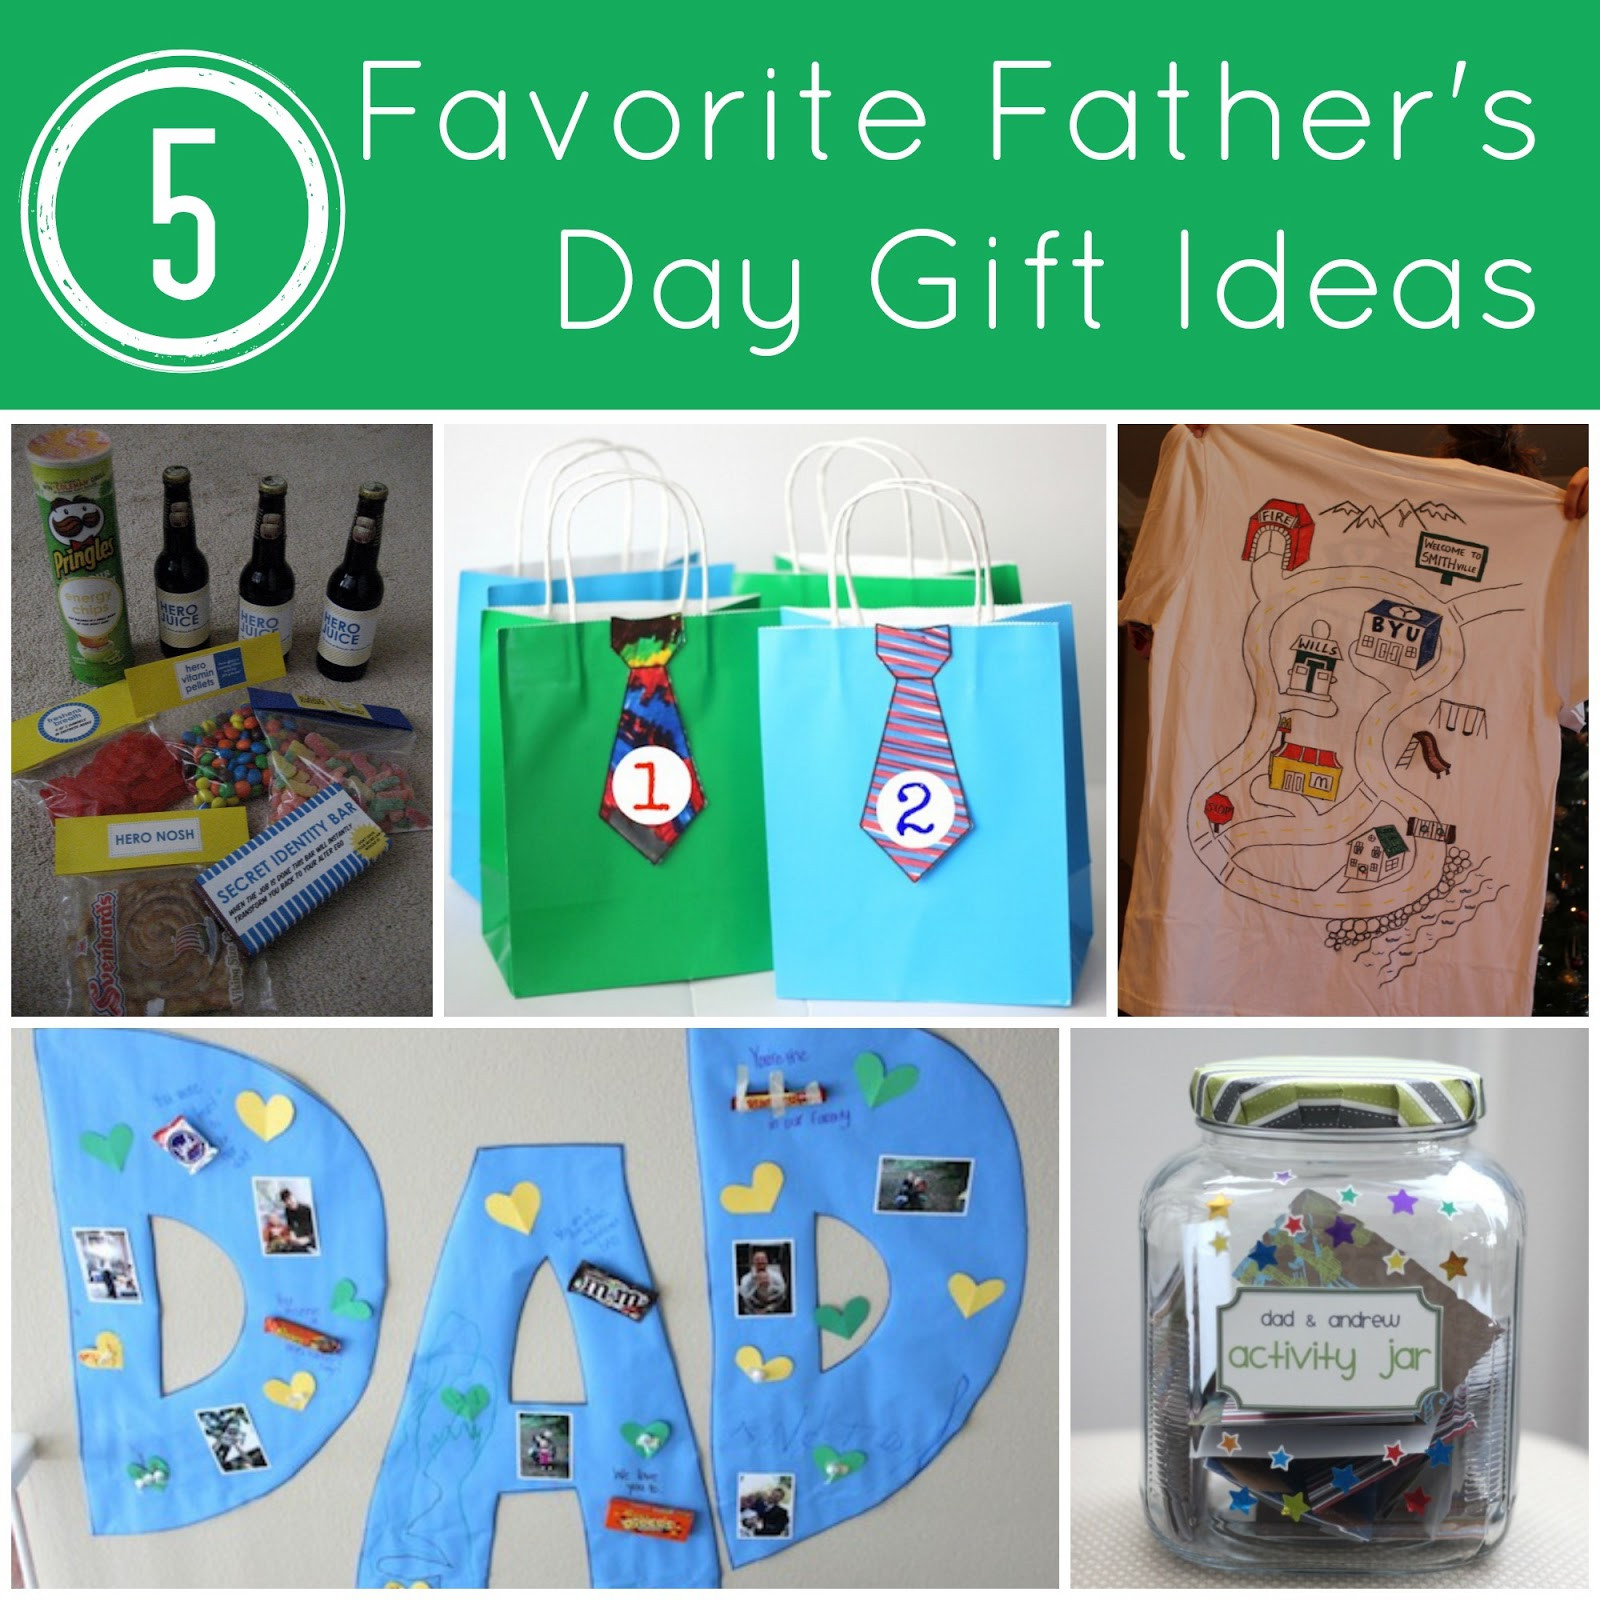 Fathers Day Gift From Toddler
 Toddler Approved 5 Favorite Father s Day Gift Ideas